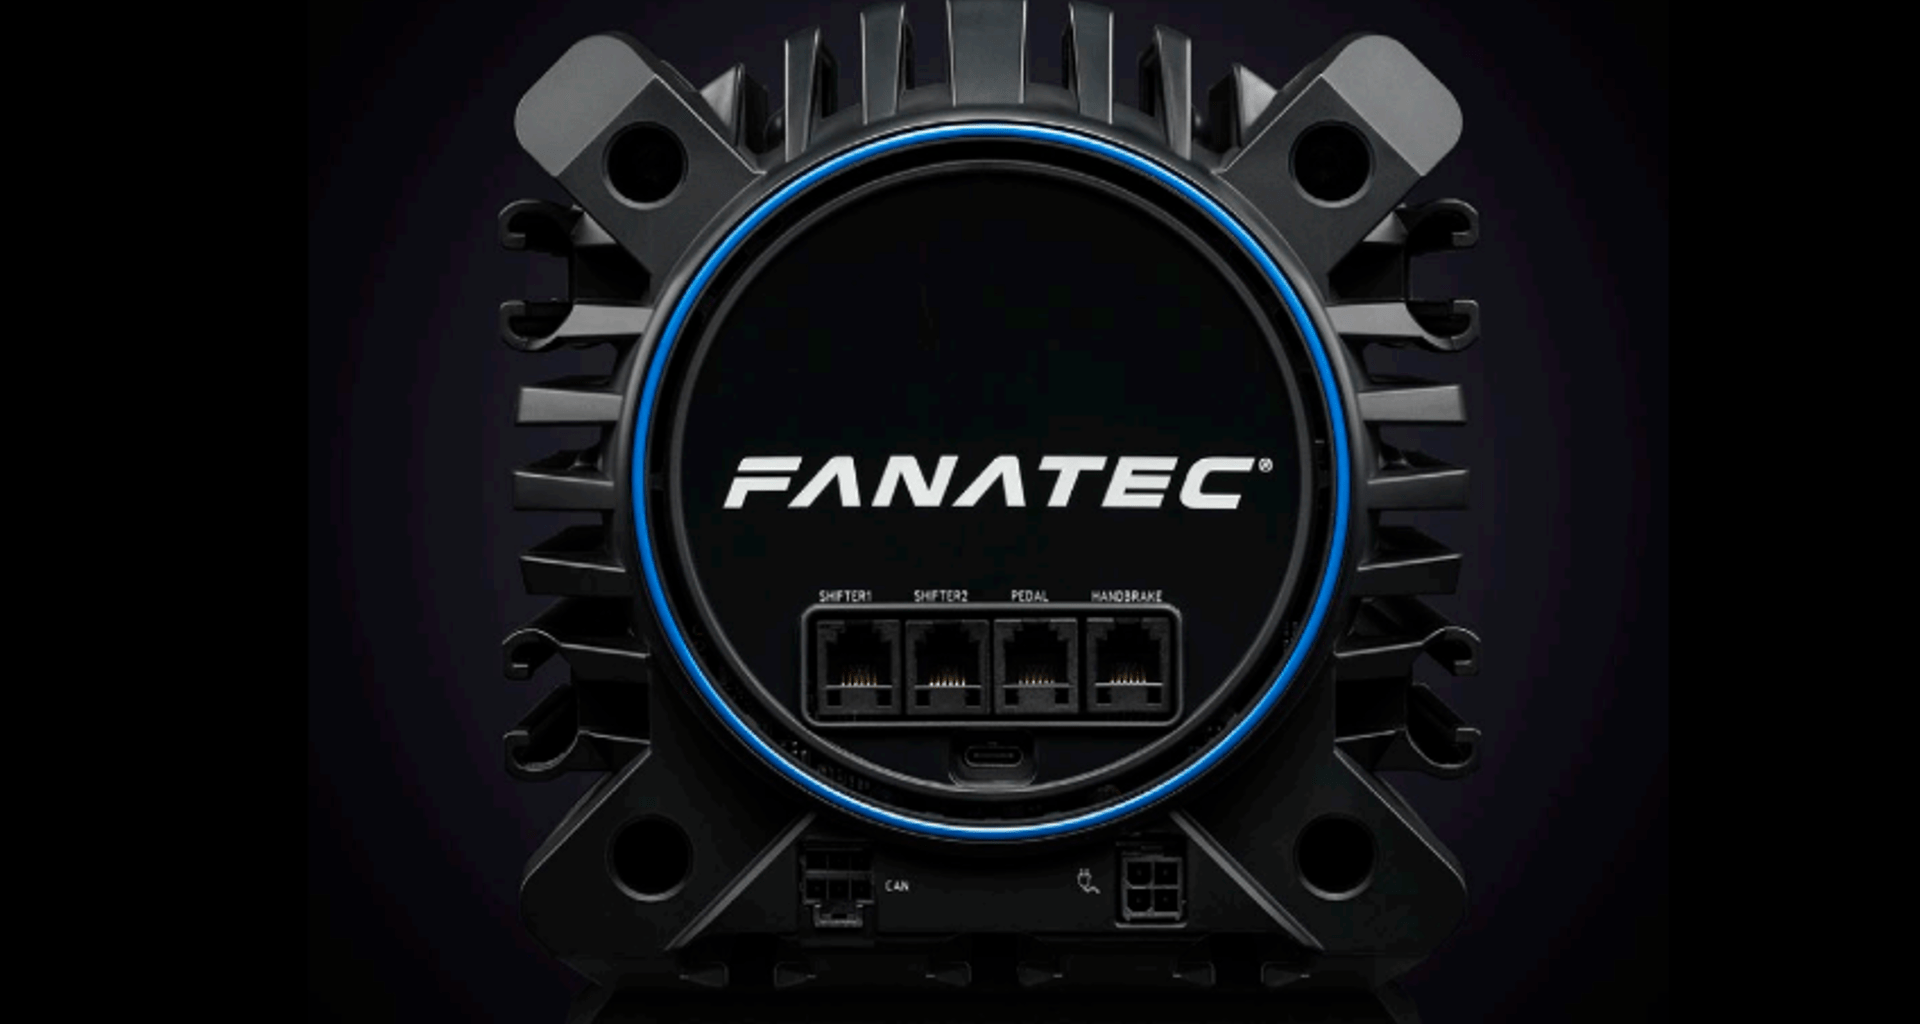 The Fanatec ClubSport DD+ is a 15Nm, PlayStation compatible, wheel base